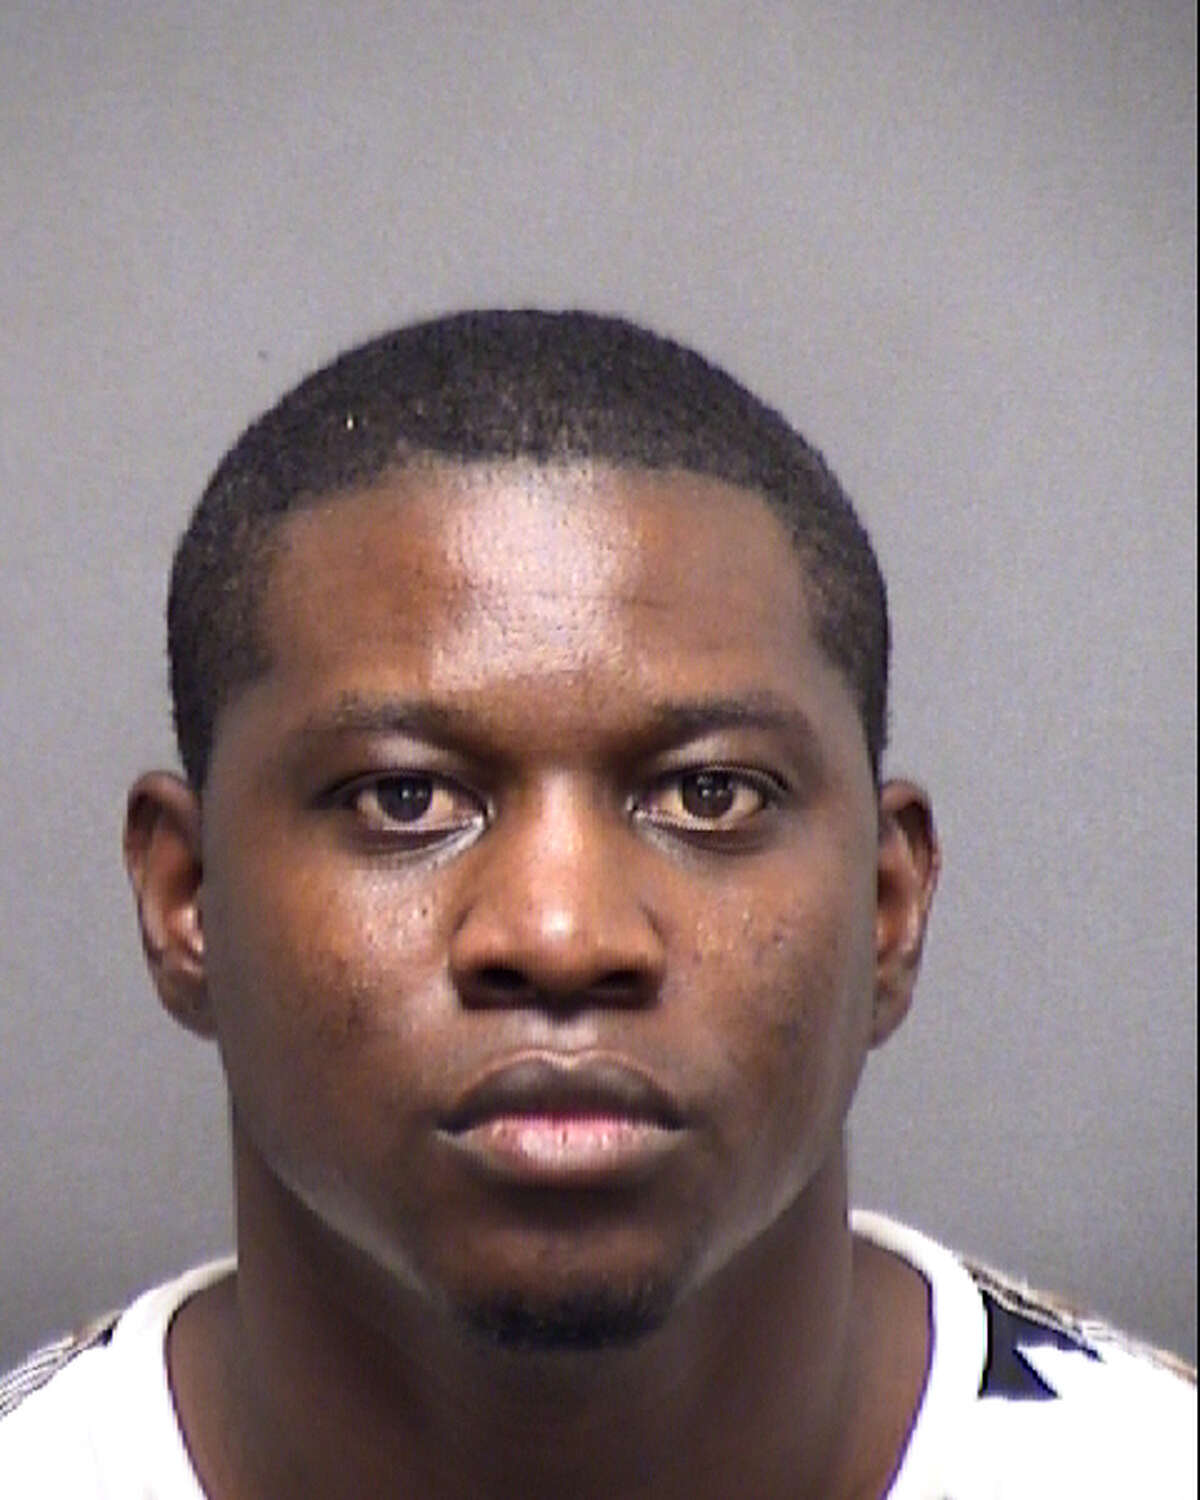 Justin Antwan Jackson, 29, was arrested for failure to stop and render aid resulting in death after a fatal accident on the North Side Friday, May 22, 2020.